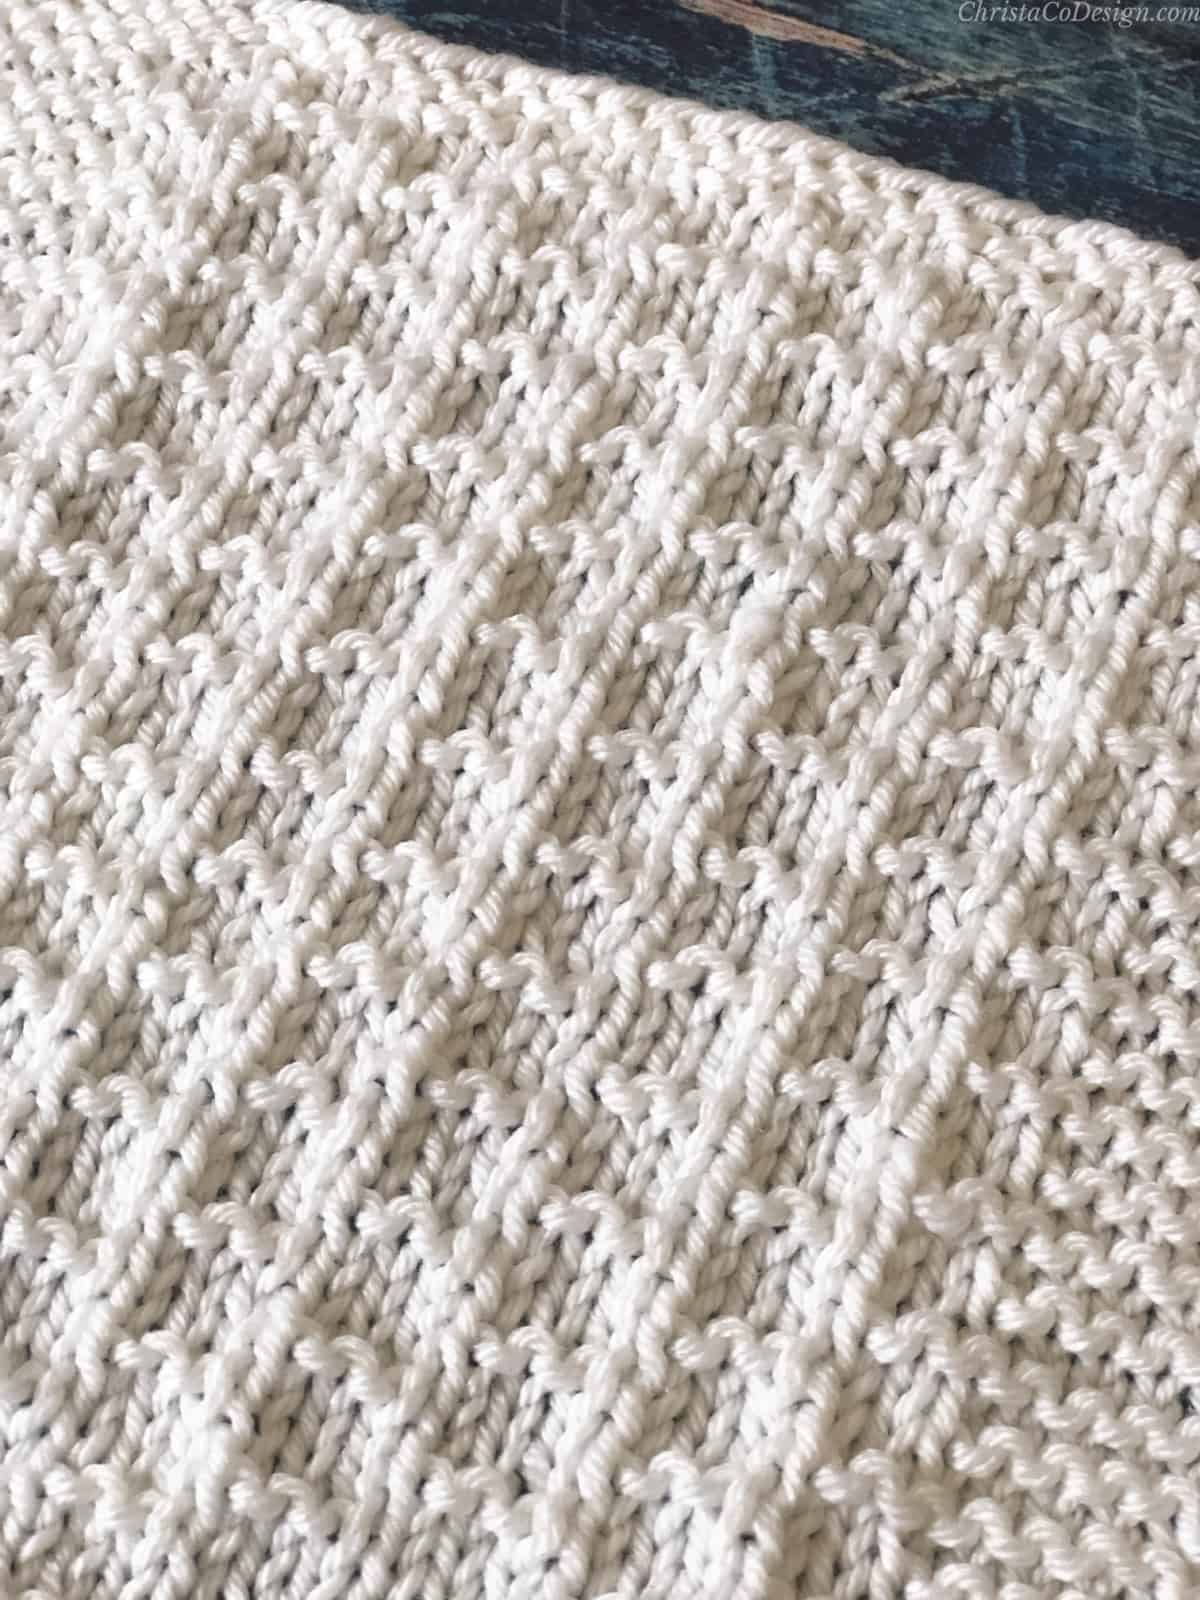 Close up textures of center on knit blanket square pattern in white.